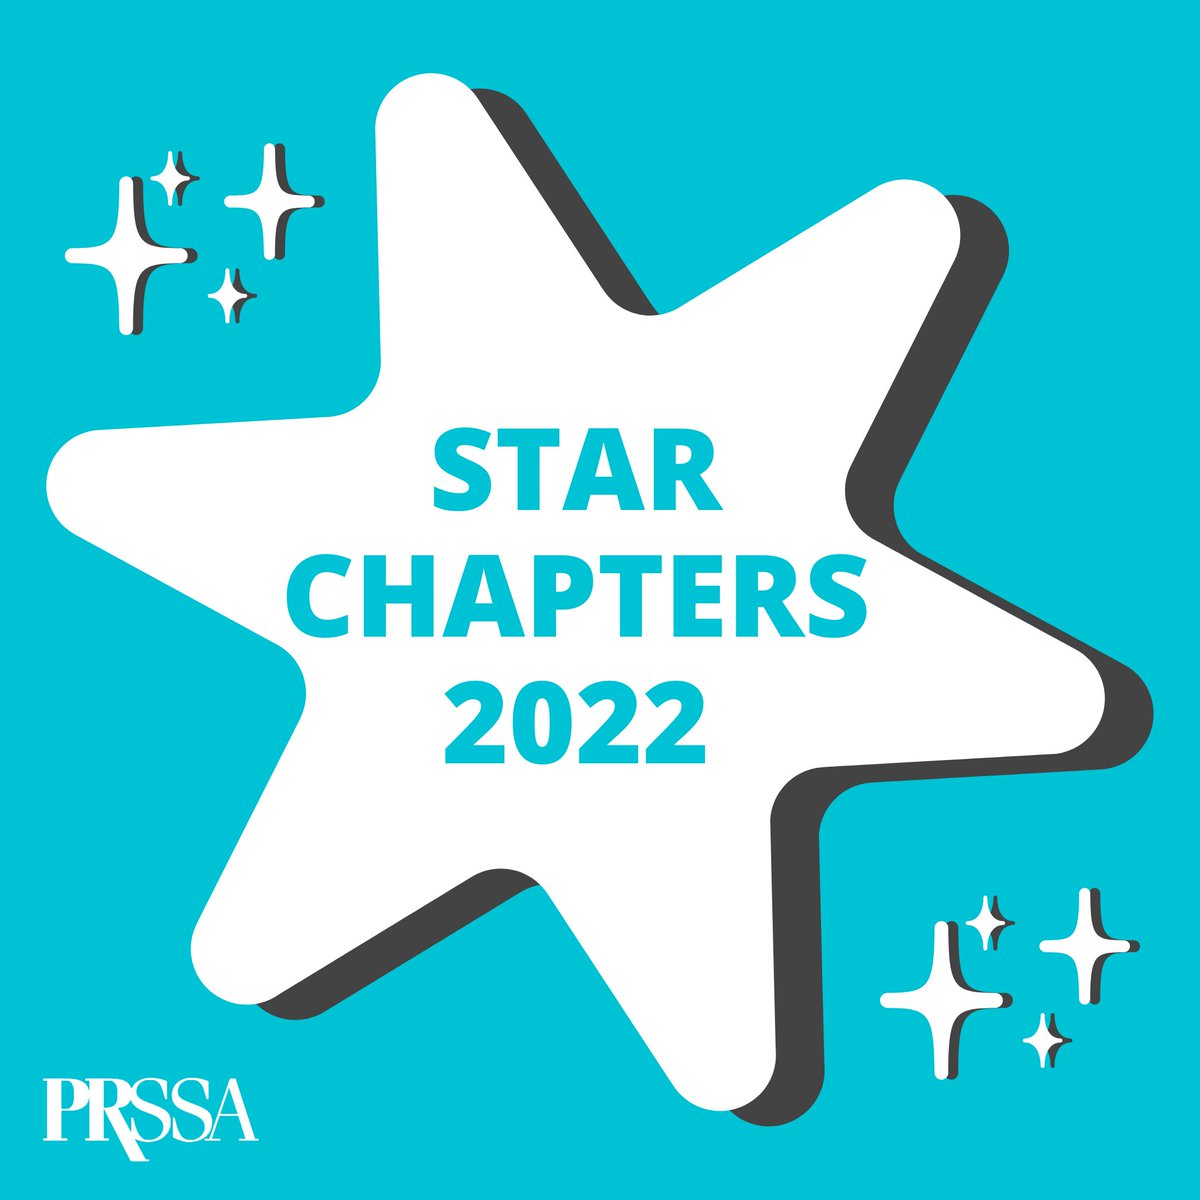 So proud to be a 2022 PRSSA Star Chapter Award recipient!⭐️ https://t.co/Coy51p4XBI